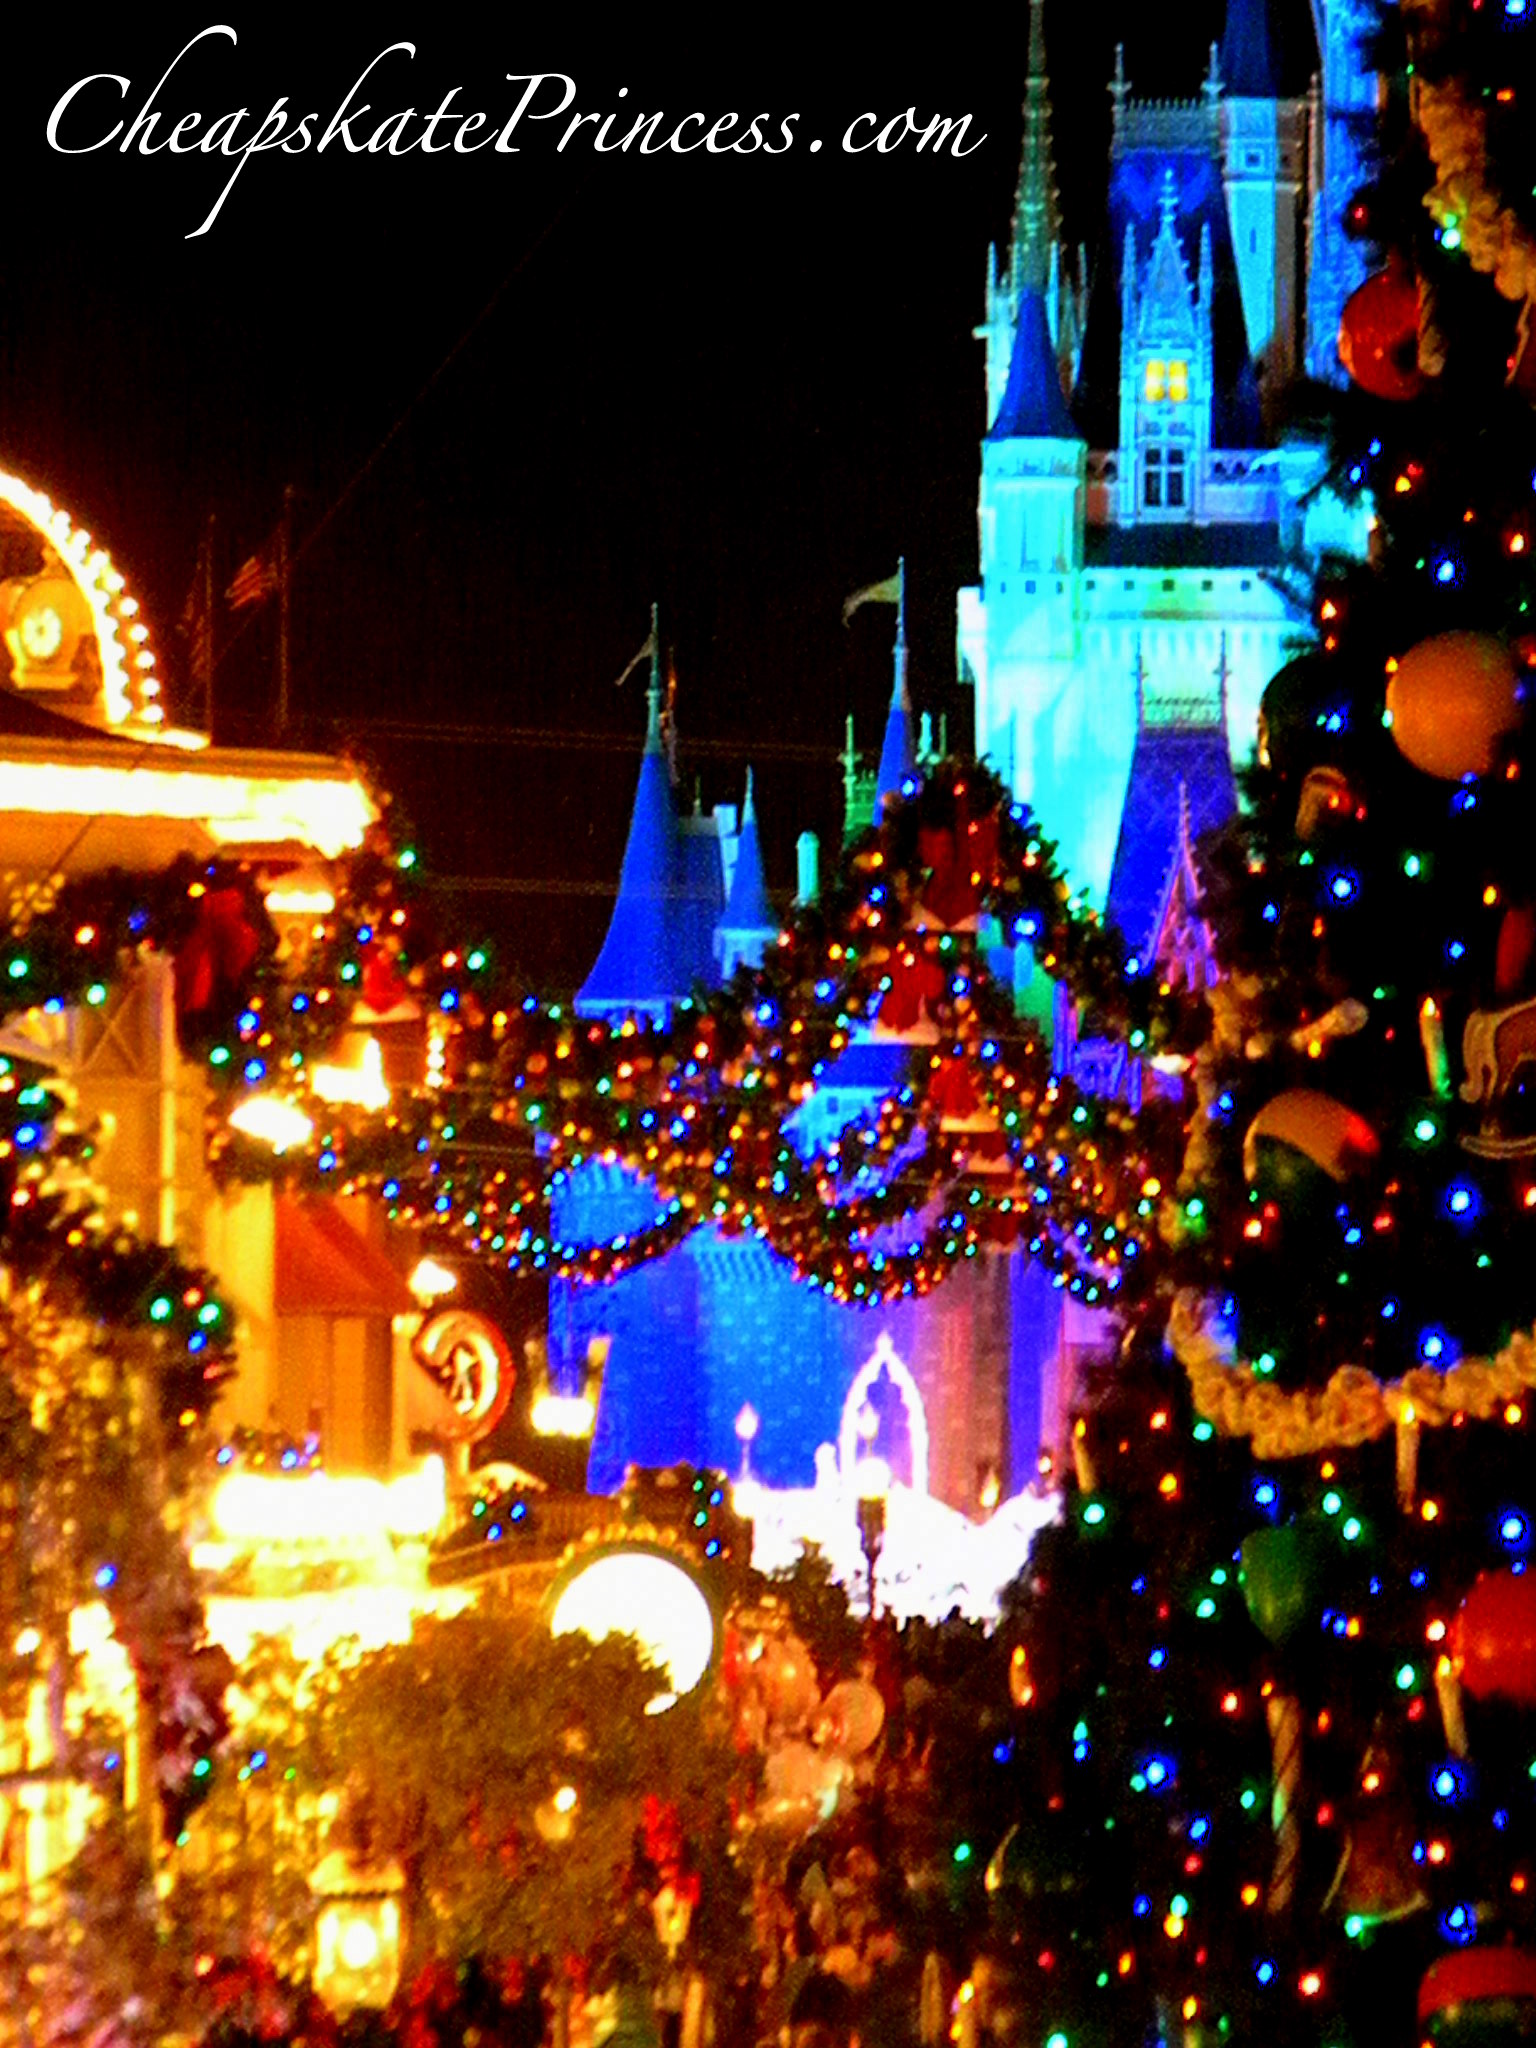 Afford To Stay At Disney World During The Week Of Christmas